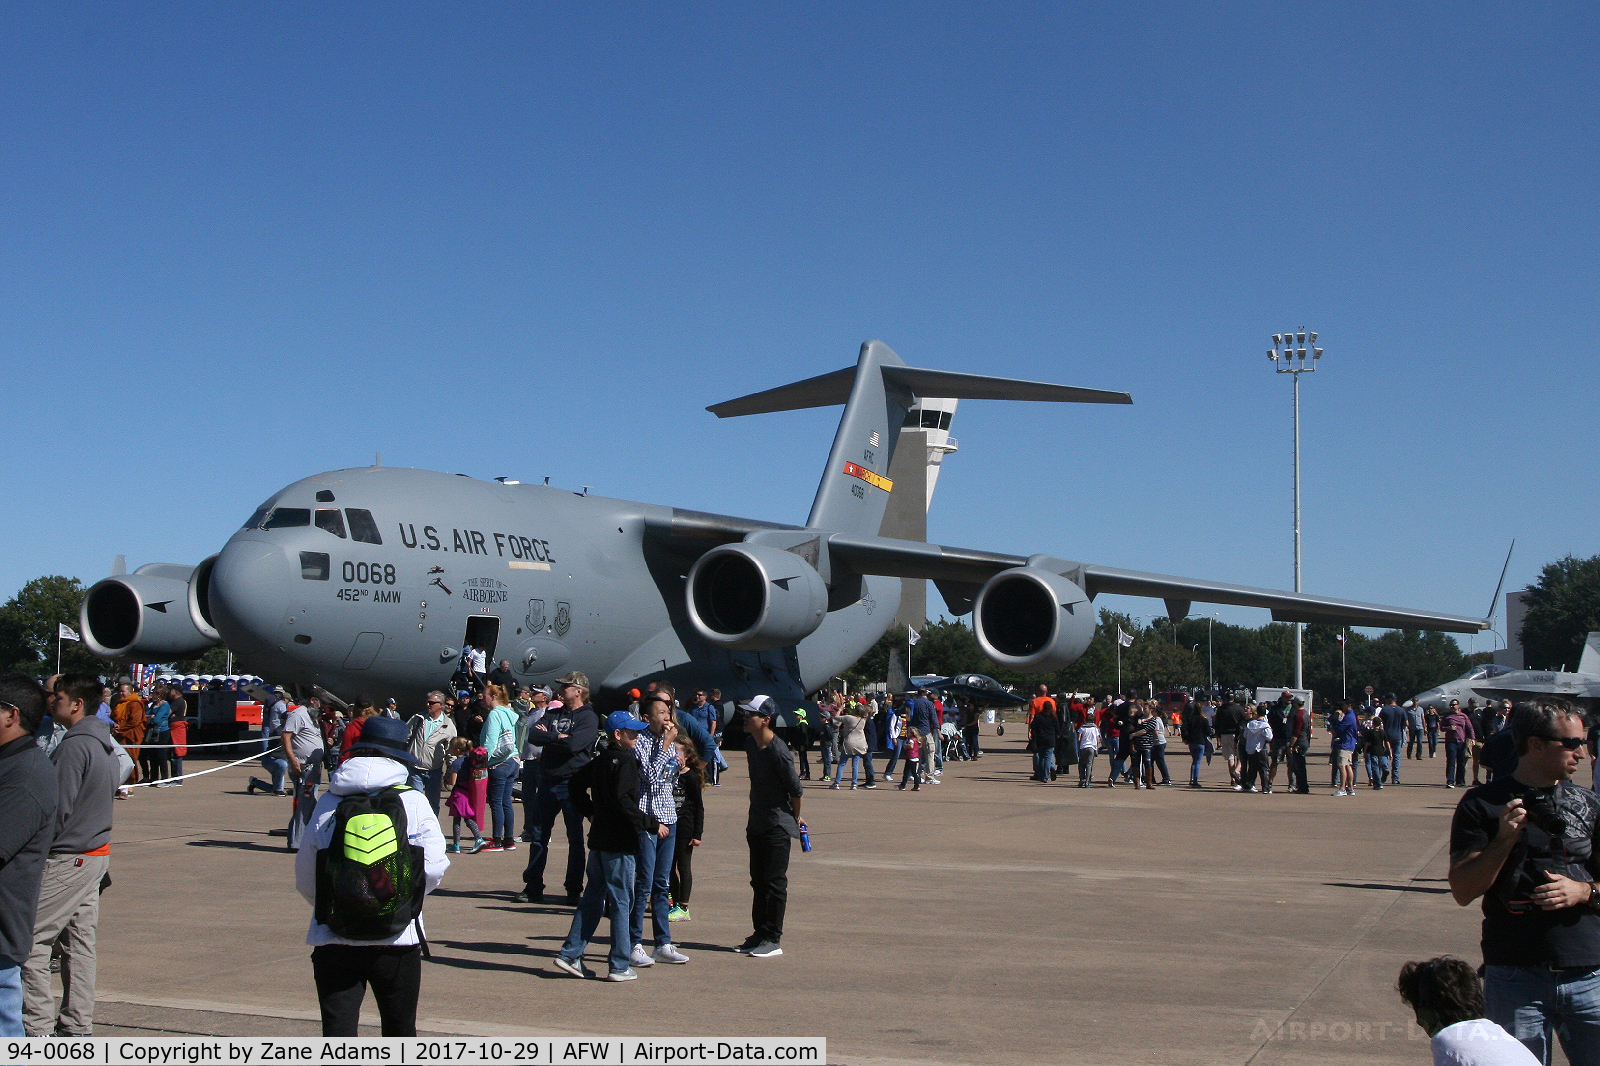 94-0068, 1994 McDonnell Douglas C-17A Globemaster III C/N 50028/F-27, At the 2019 Alliance Airshow